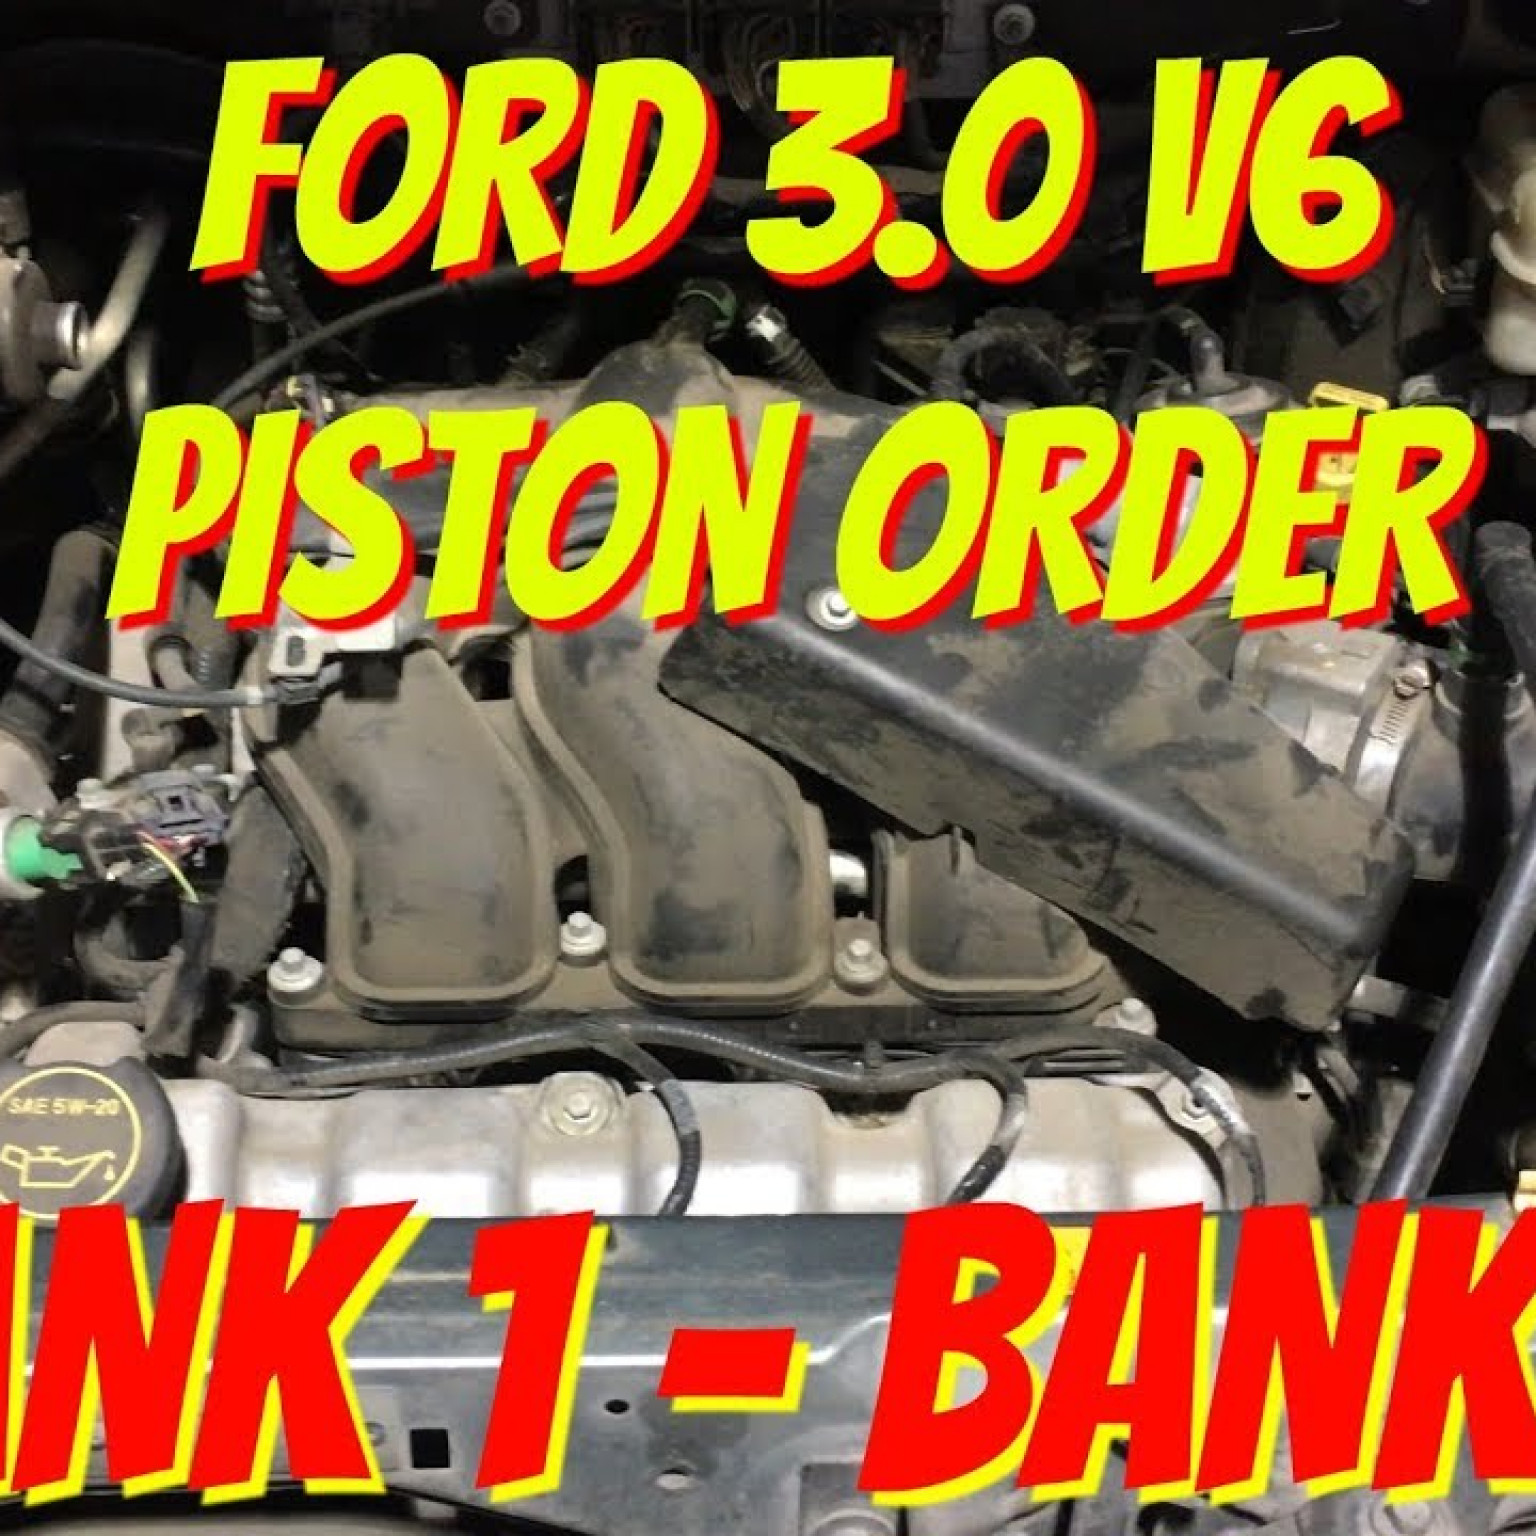 2012 Ford Fusion Firing Order | Wiring and Printable